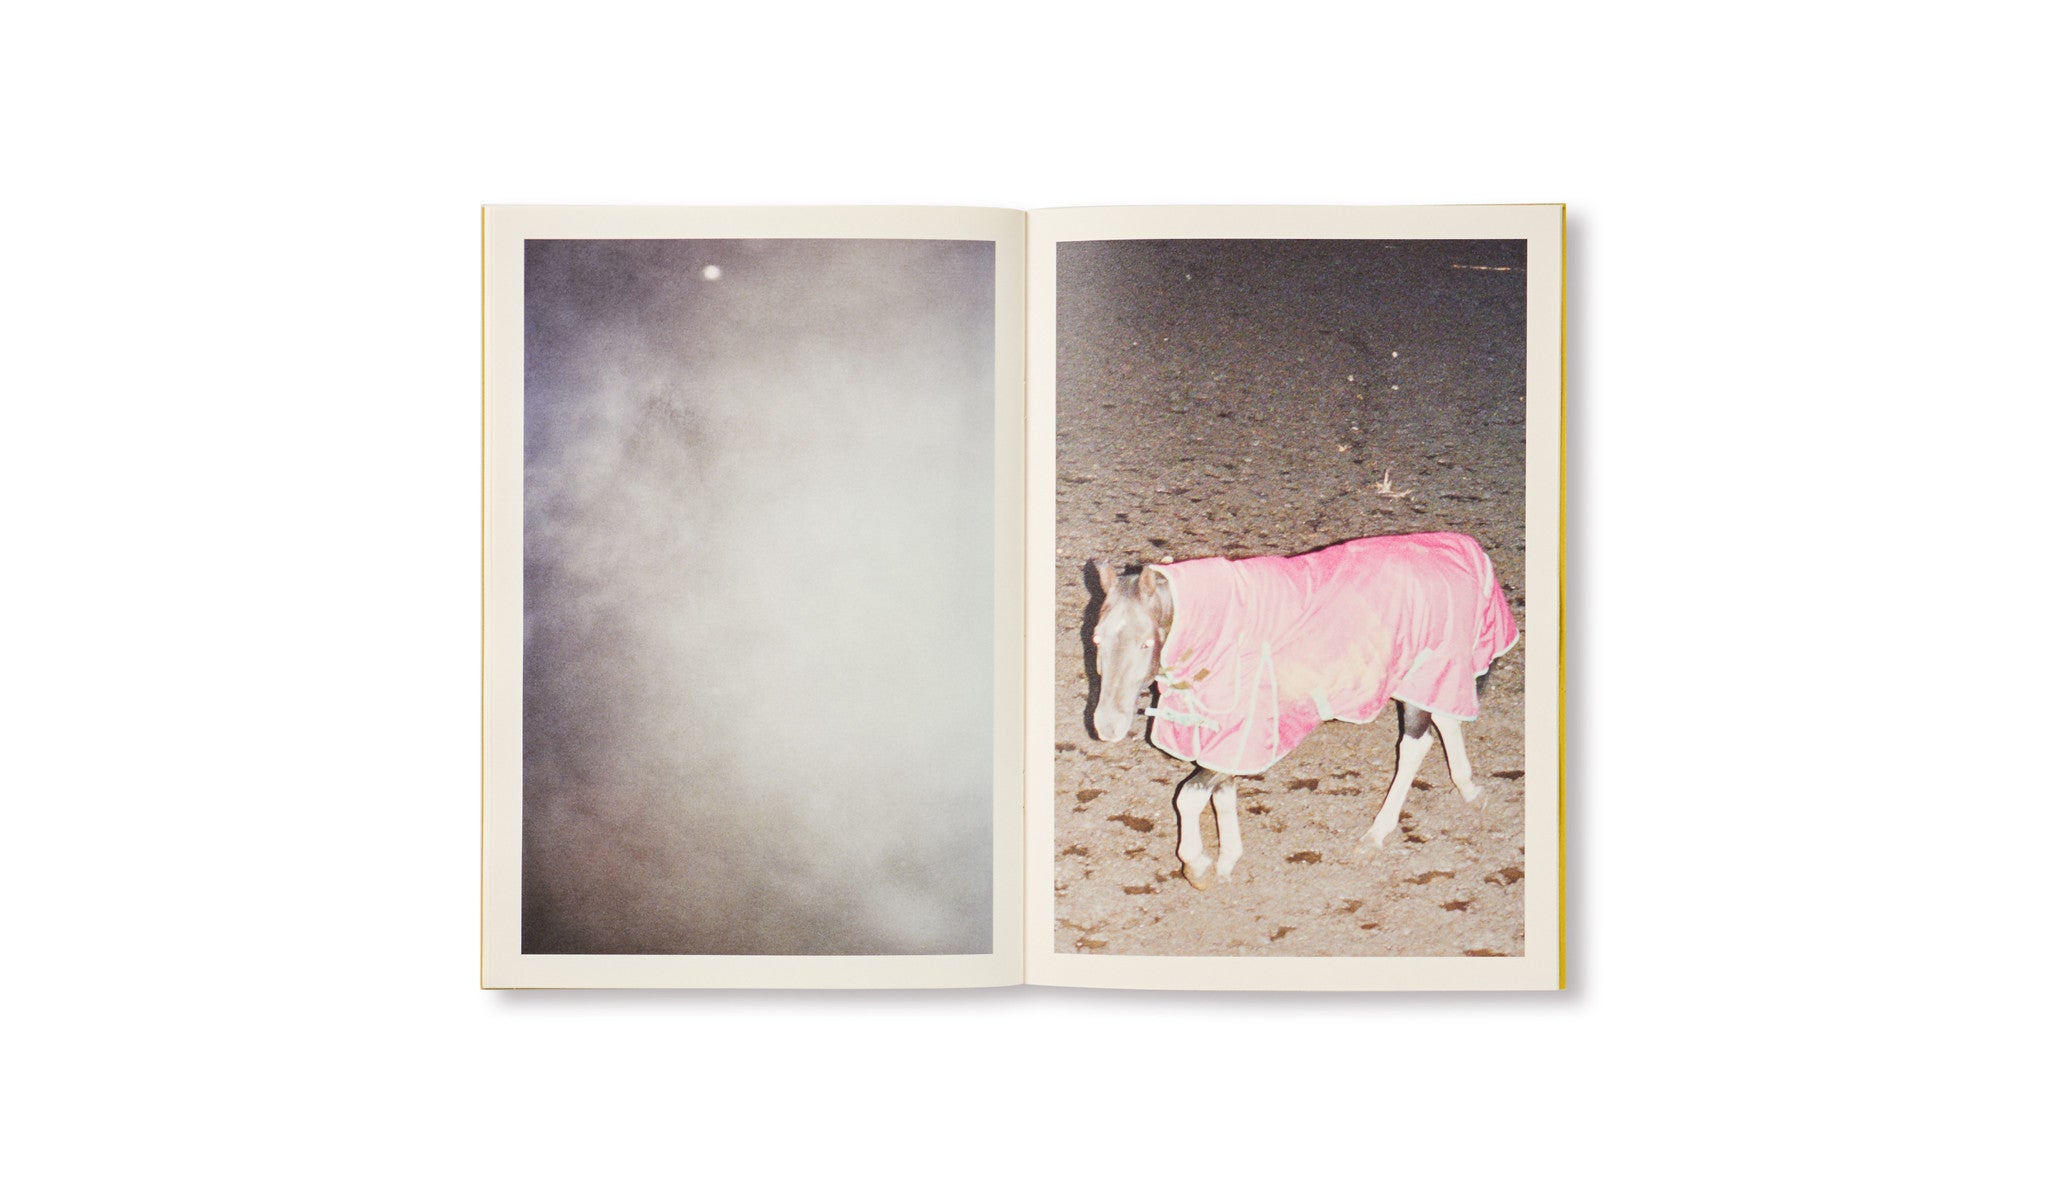 DISTANCE (PICTURES FOR AN UNTOLD STORY) by Ola Rindal [SPECIAL EDITION - B]